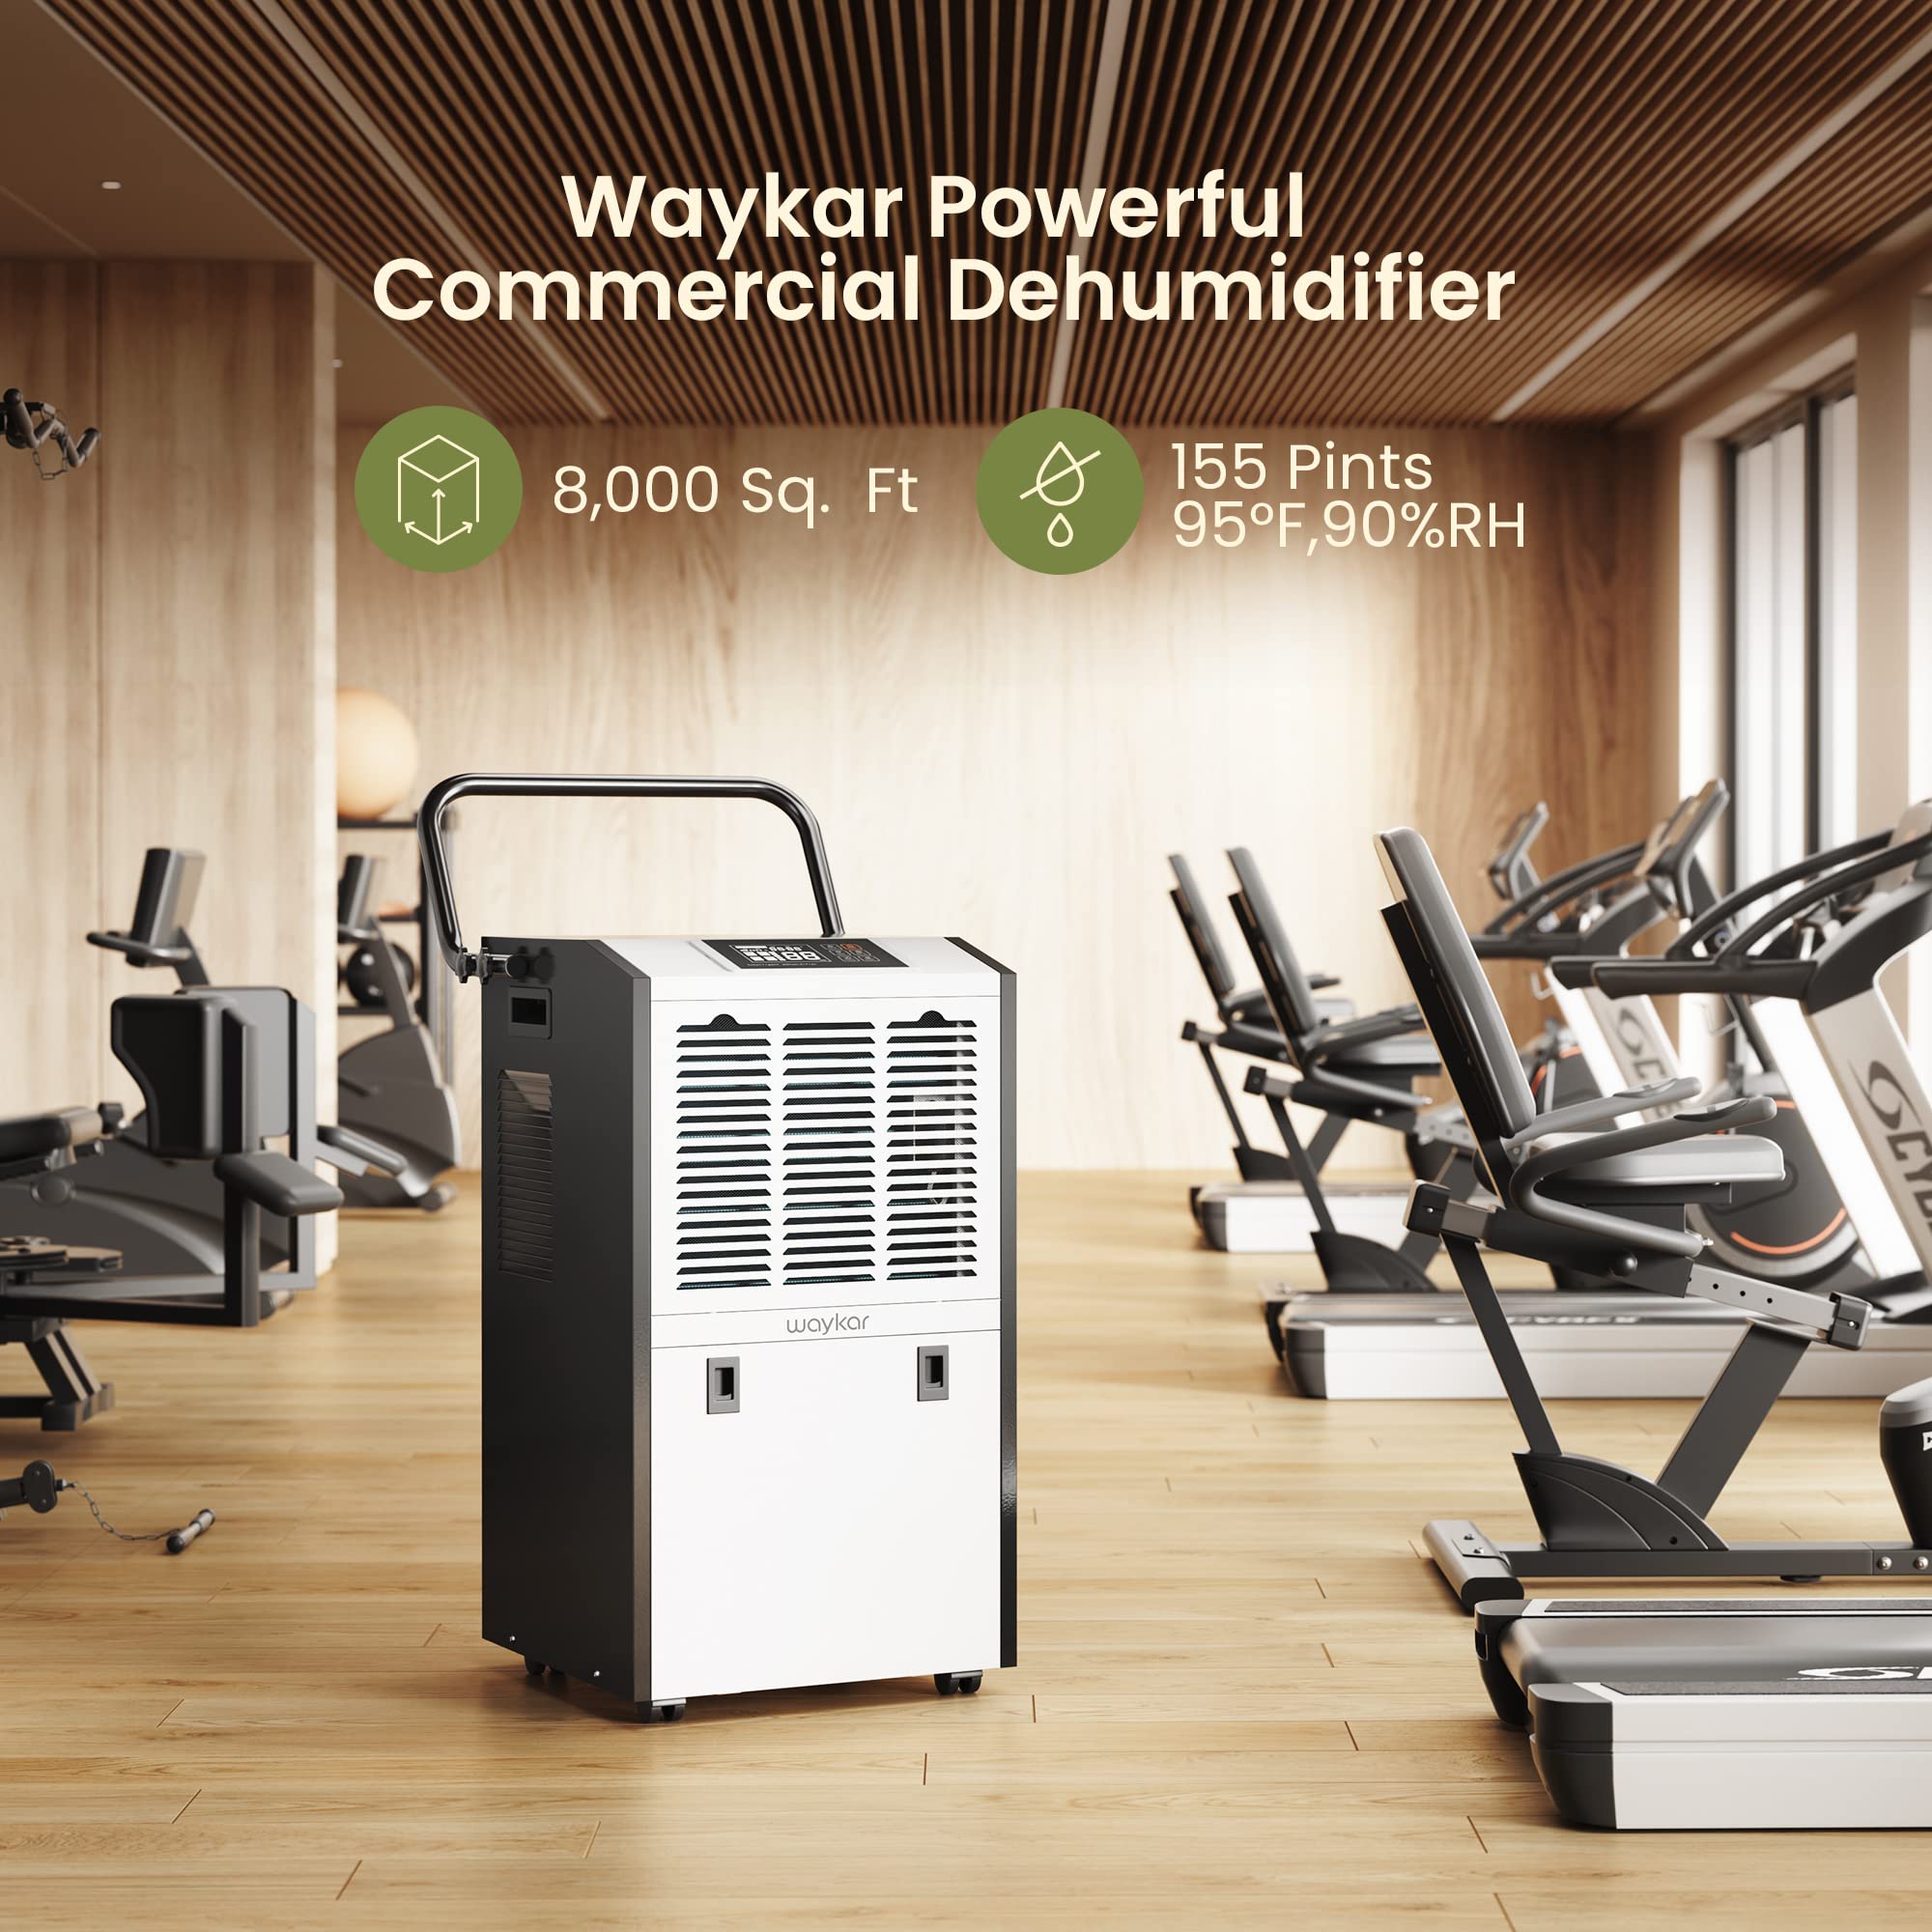 Waykar 155 Pints Commercial Dehumidifier with Drain Hose Industrial Dehumidifier with a 1.32 Gallons Water Tank in Large Space up to 8000 Sq. Ft for Warehouse Basements Whole House Moisture Remove